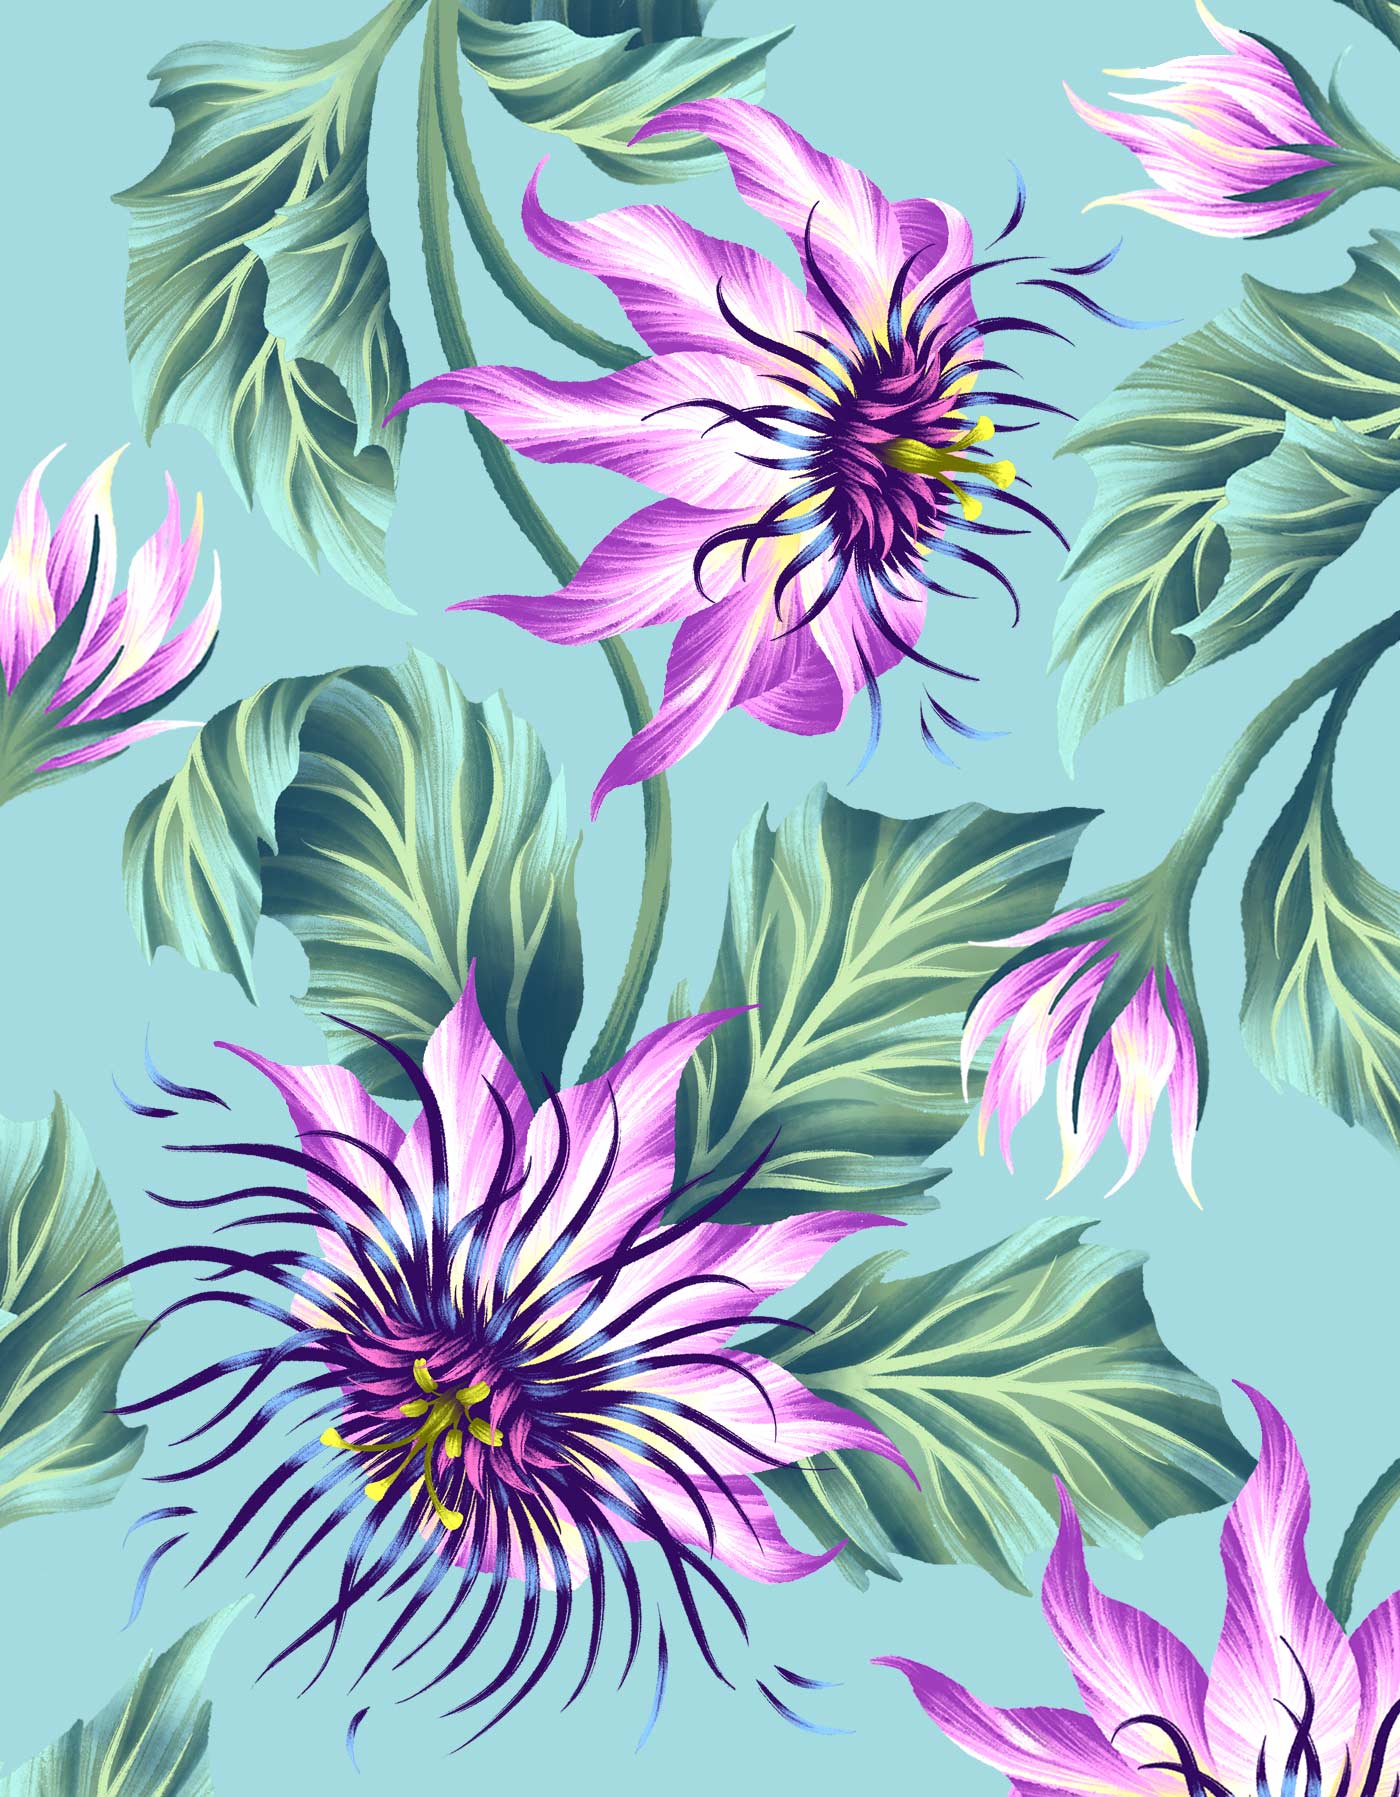 Repeating pattern illustration of passionflowers and saltbush leaves by Andrea Muller